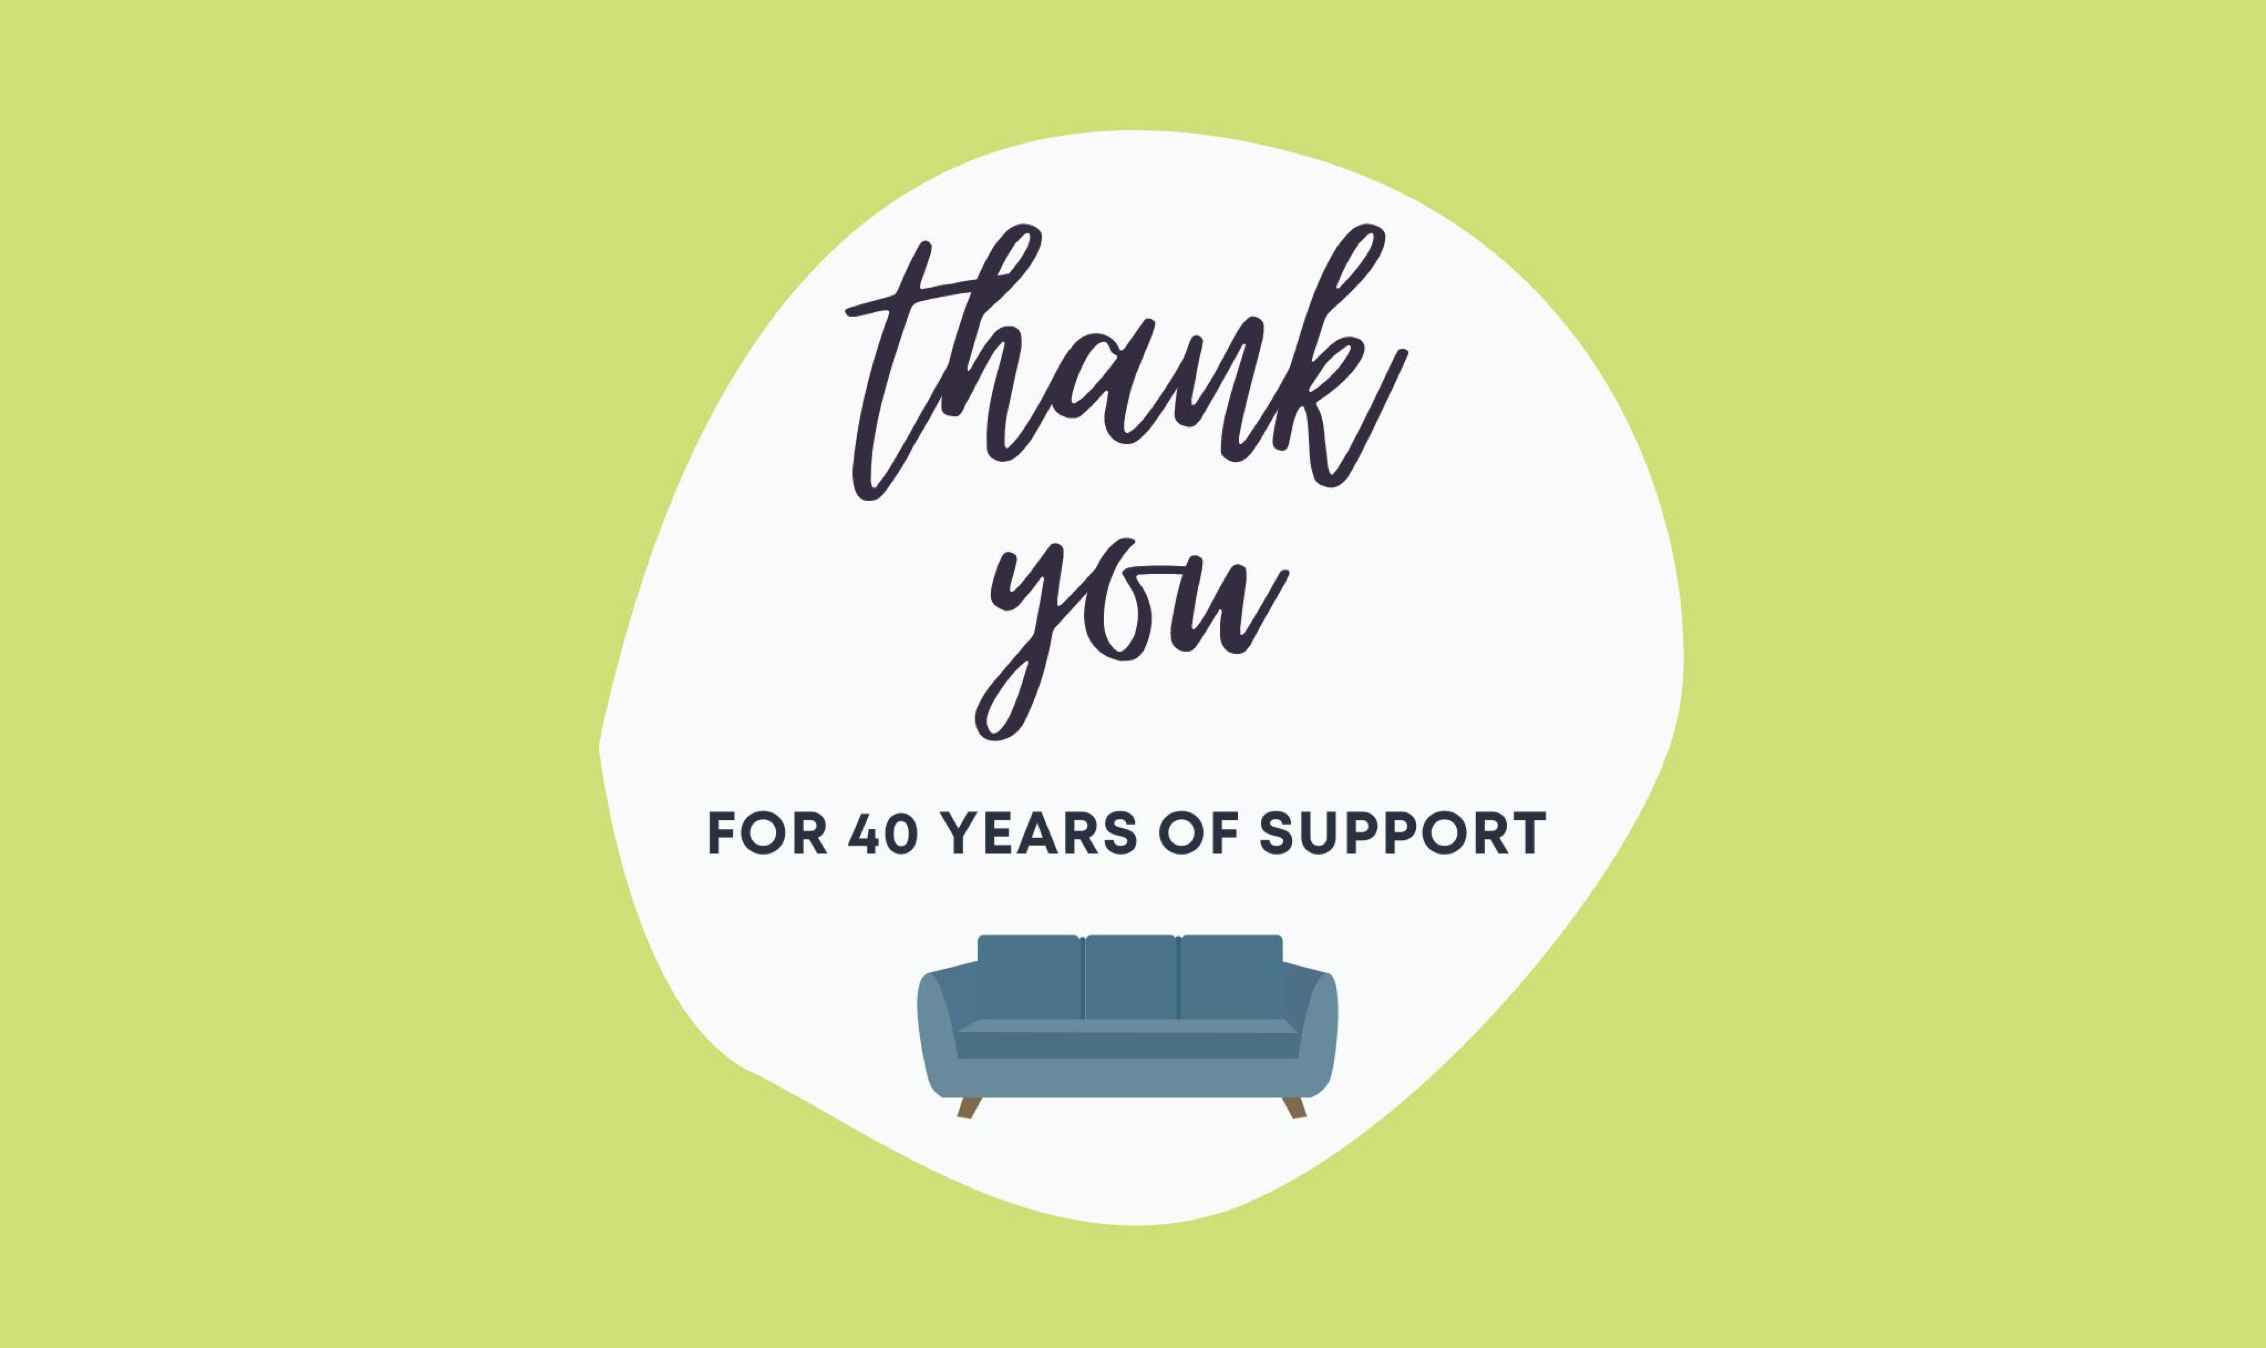 Thank You for 40 Years of Support